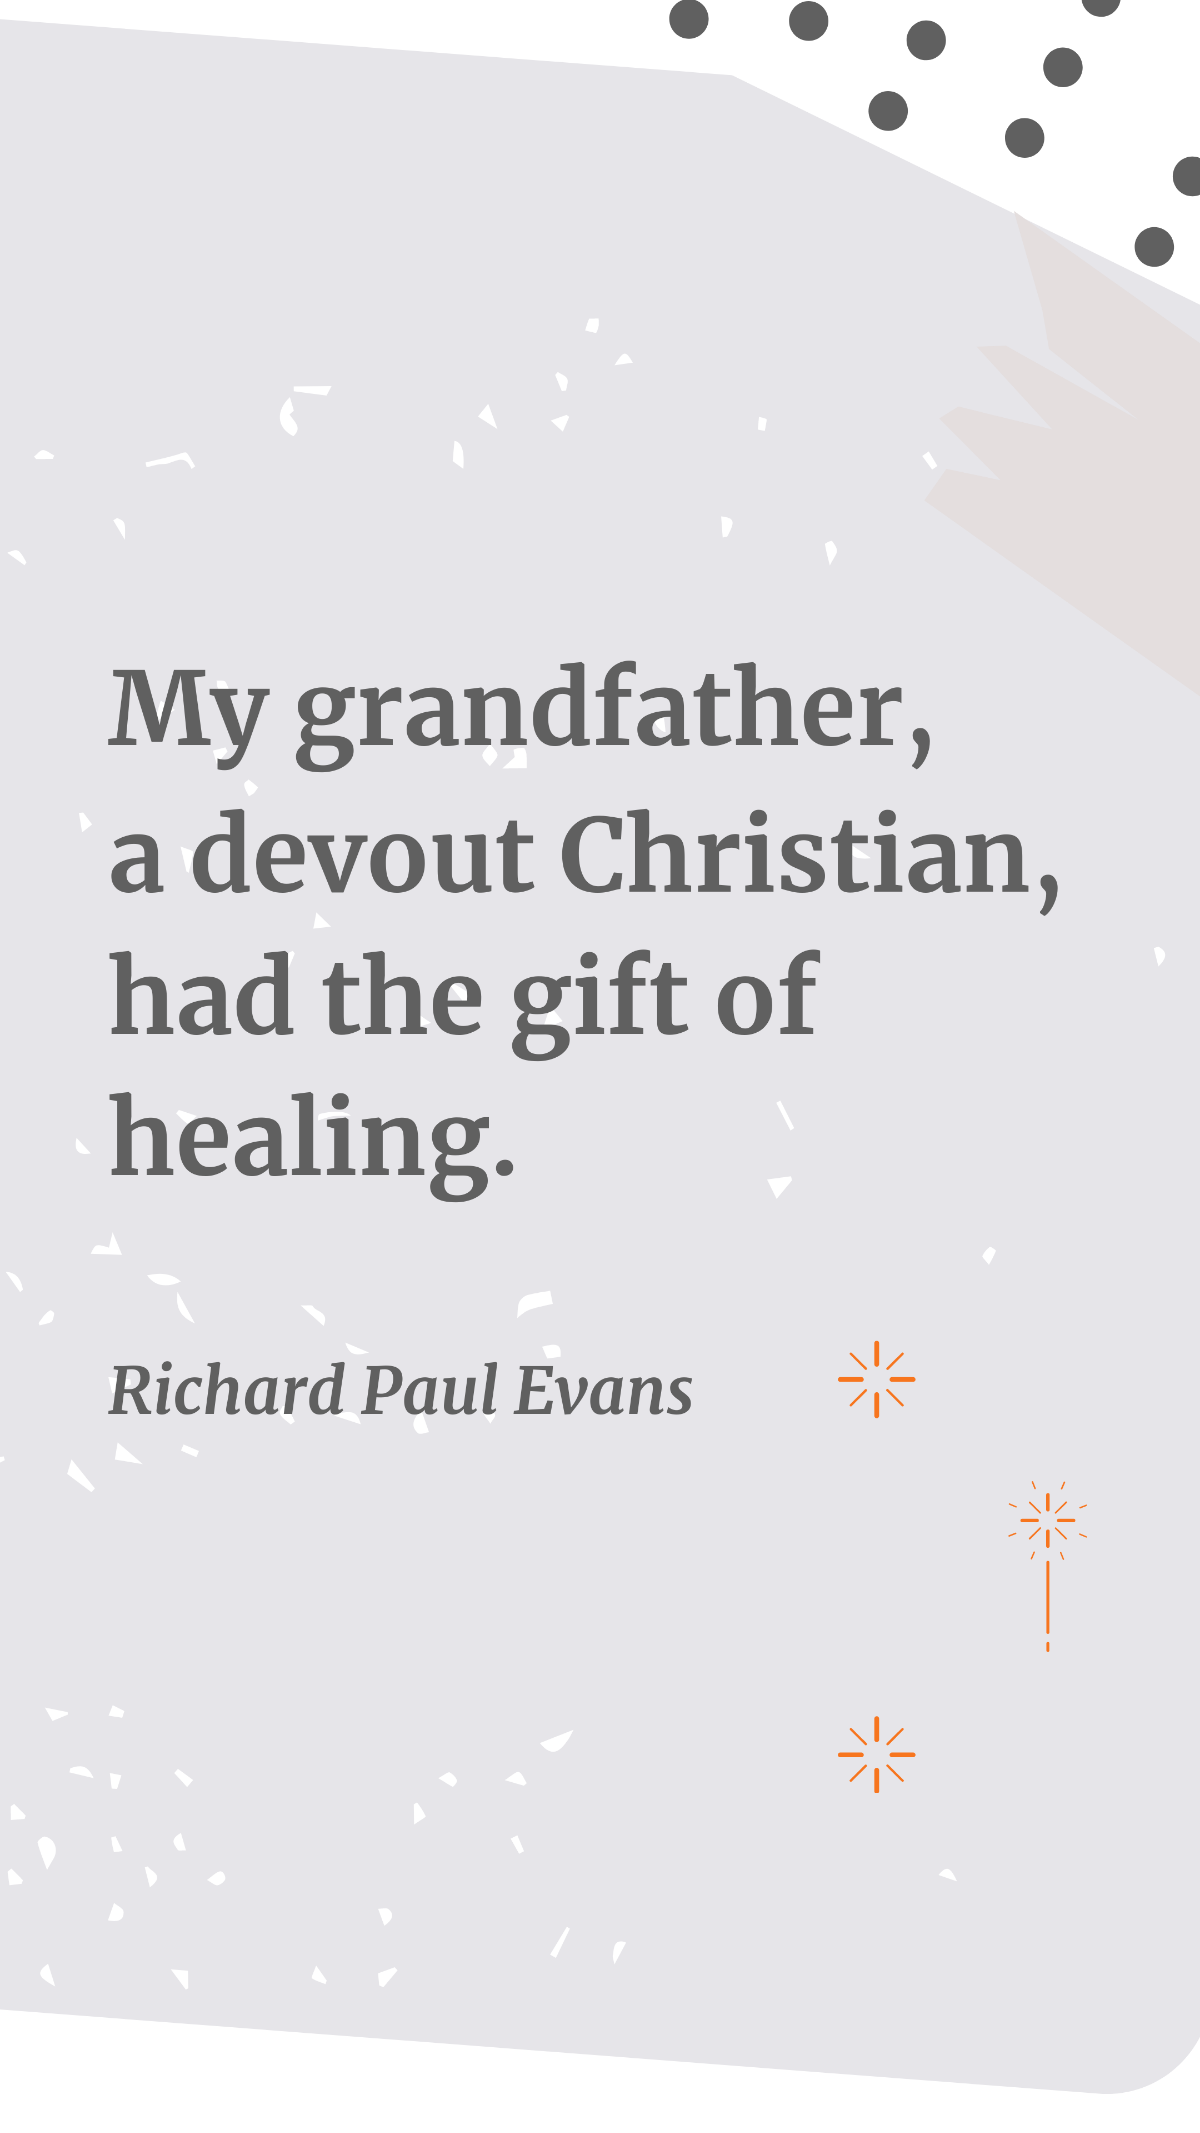 Richard Paul Evans - My grandfather, a devout Christian, had the gift of healing. Template